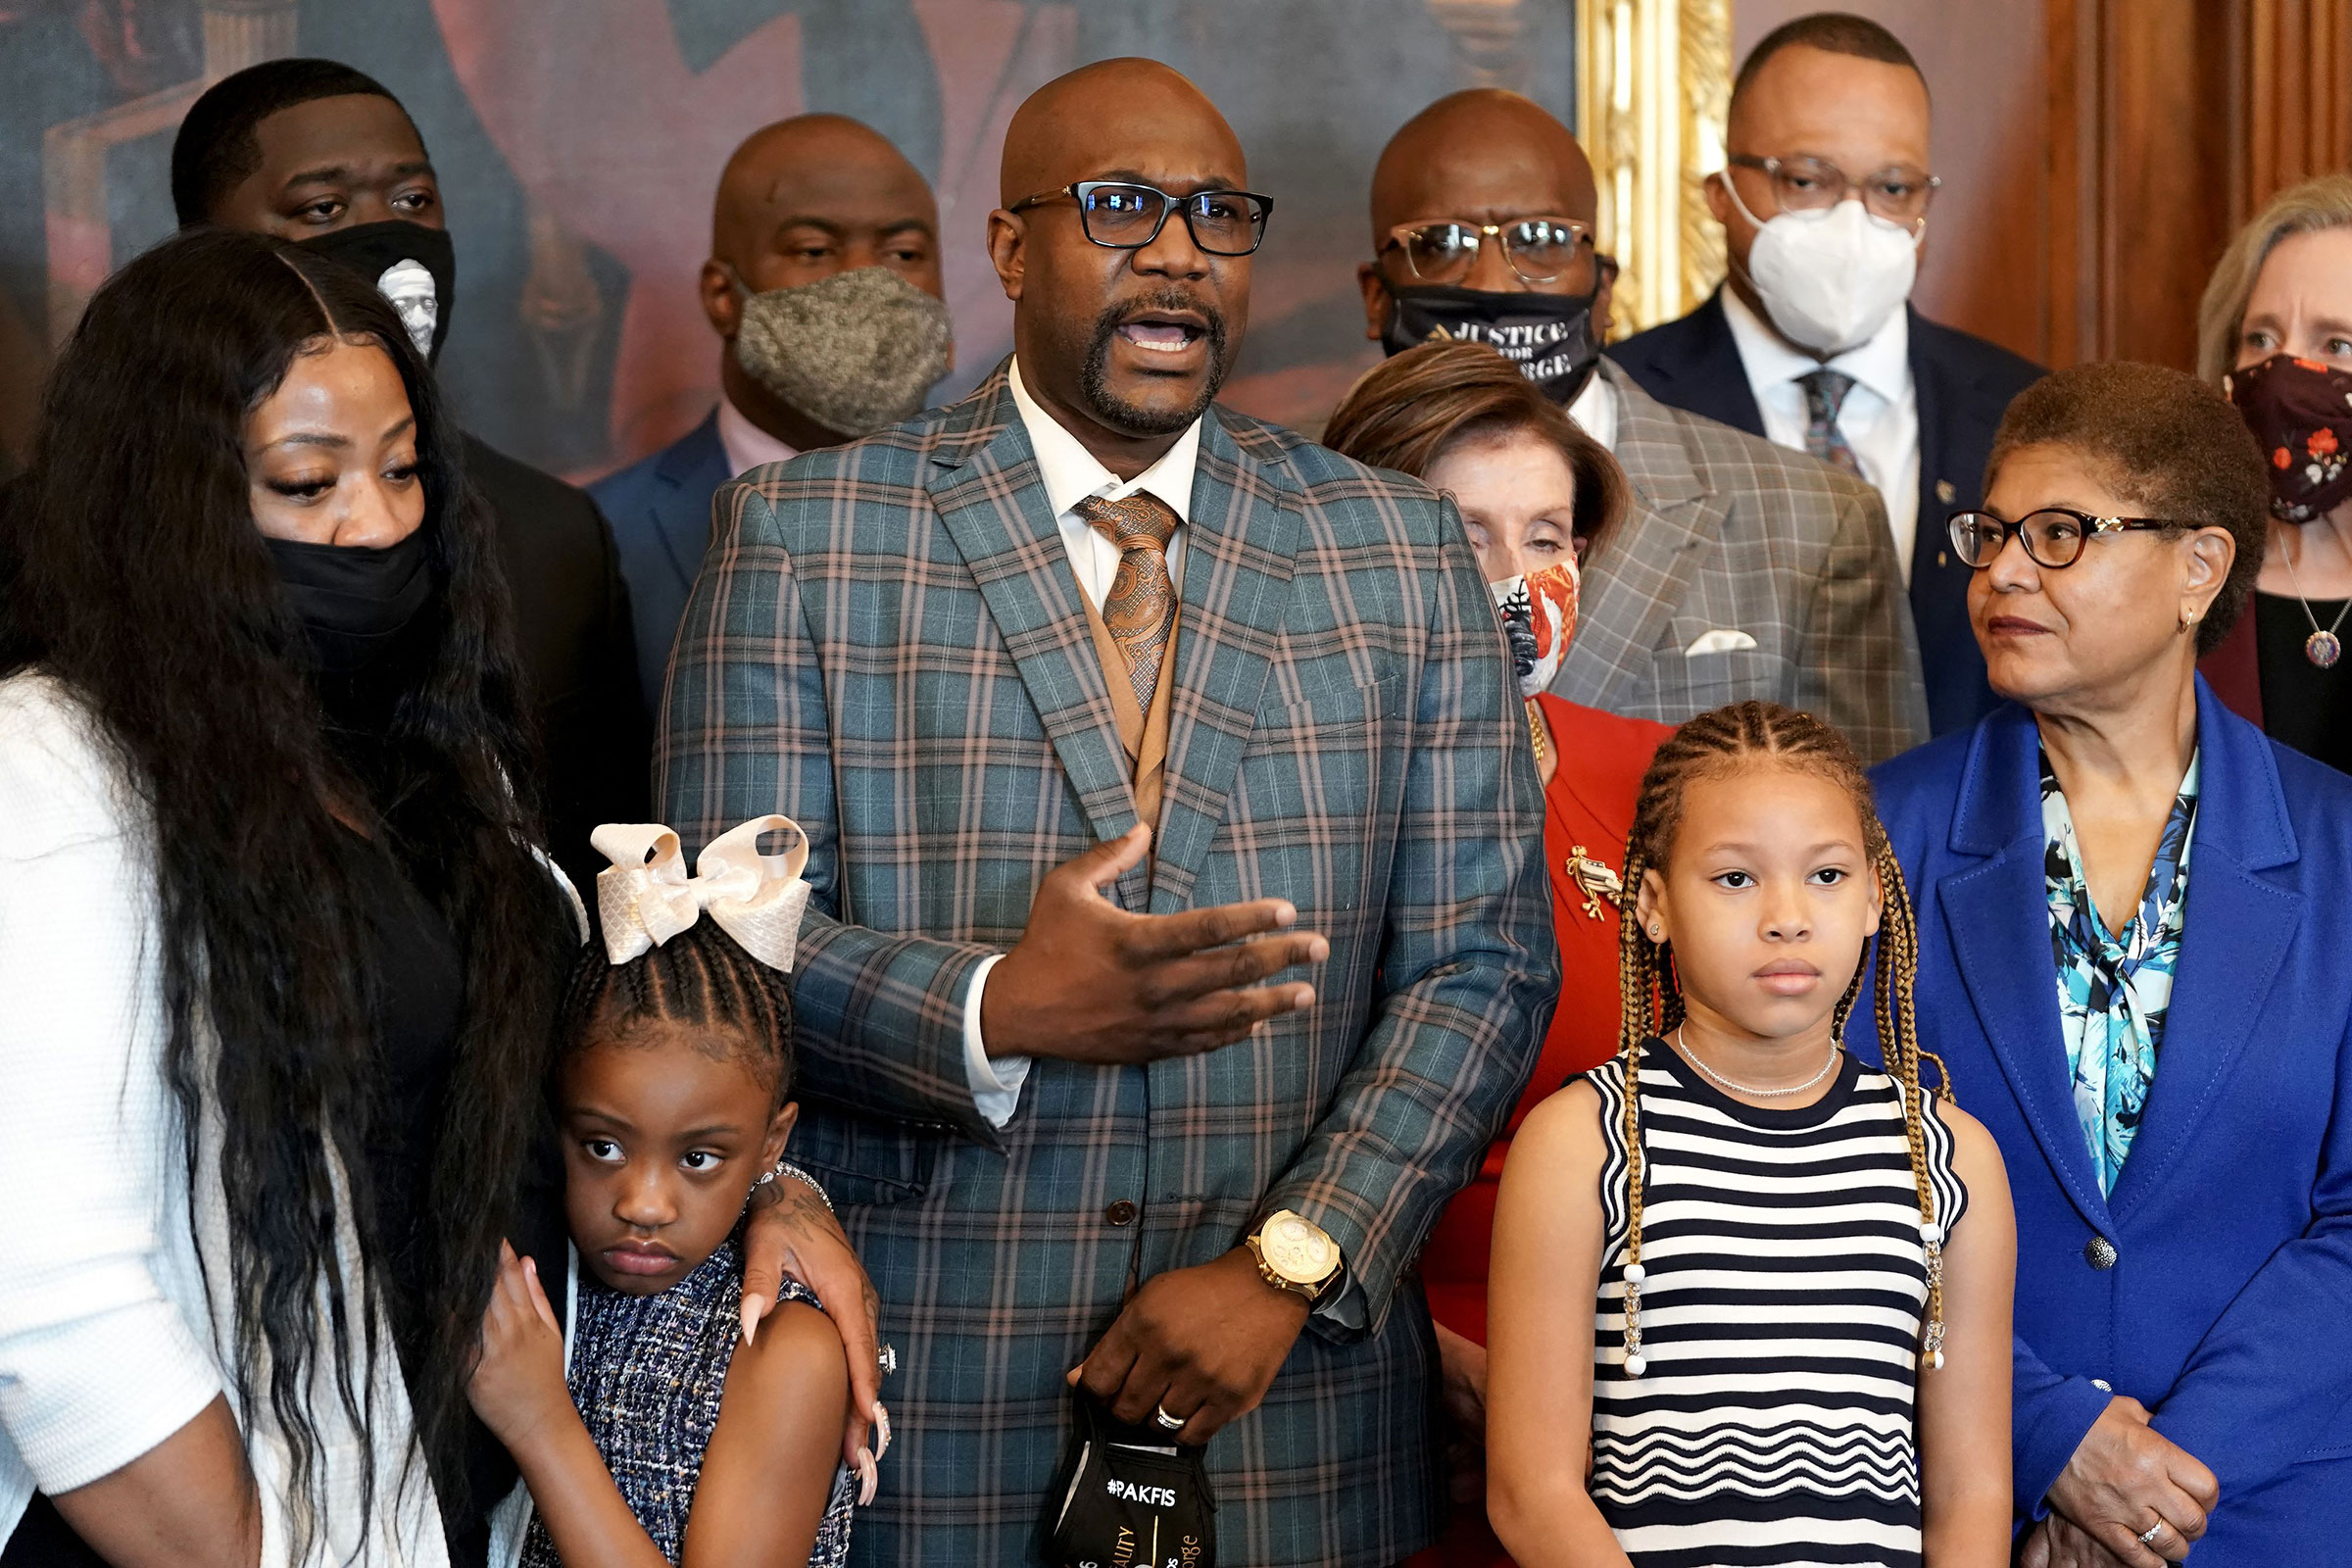 Philonise Floyd, the brother of George Floyd, speaks as he and members of the Floyd family meet with House Speaker Nancy Pelosi and Rep. Karen Bass in the Rayburn Room of the Capitol in Washington, on May 25, 2021. (Greg Nash—Pool/AFP/Getty Images)